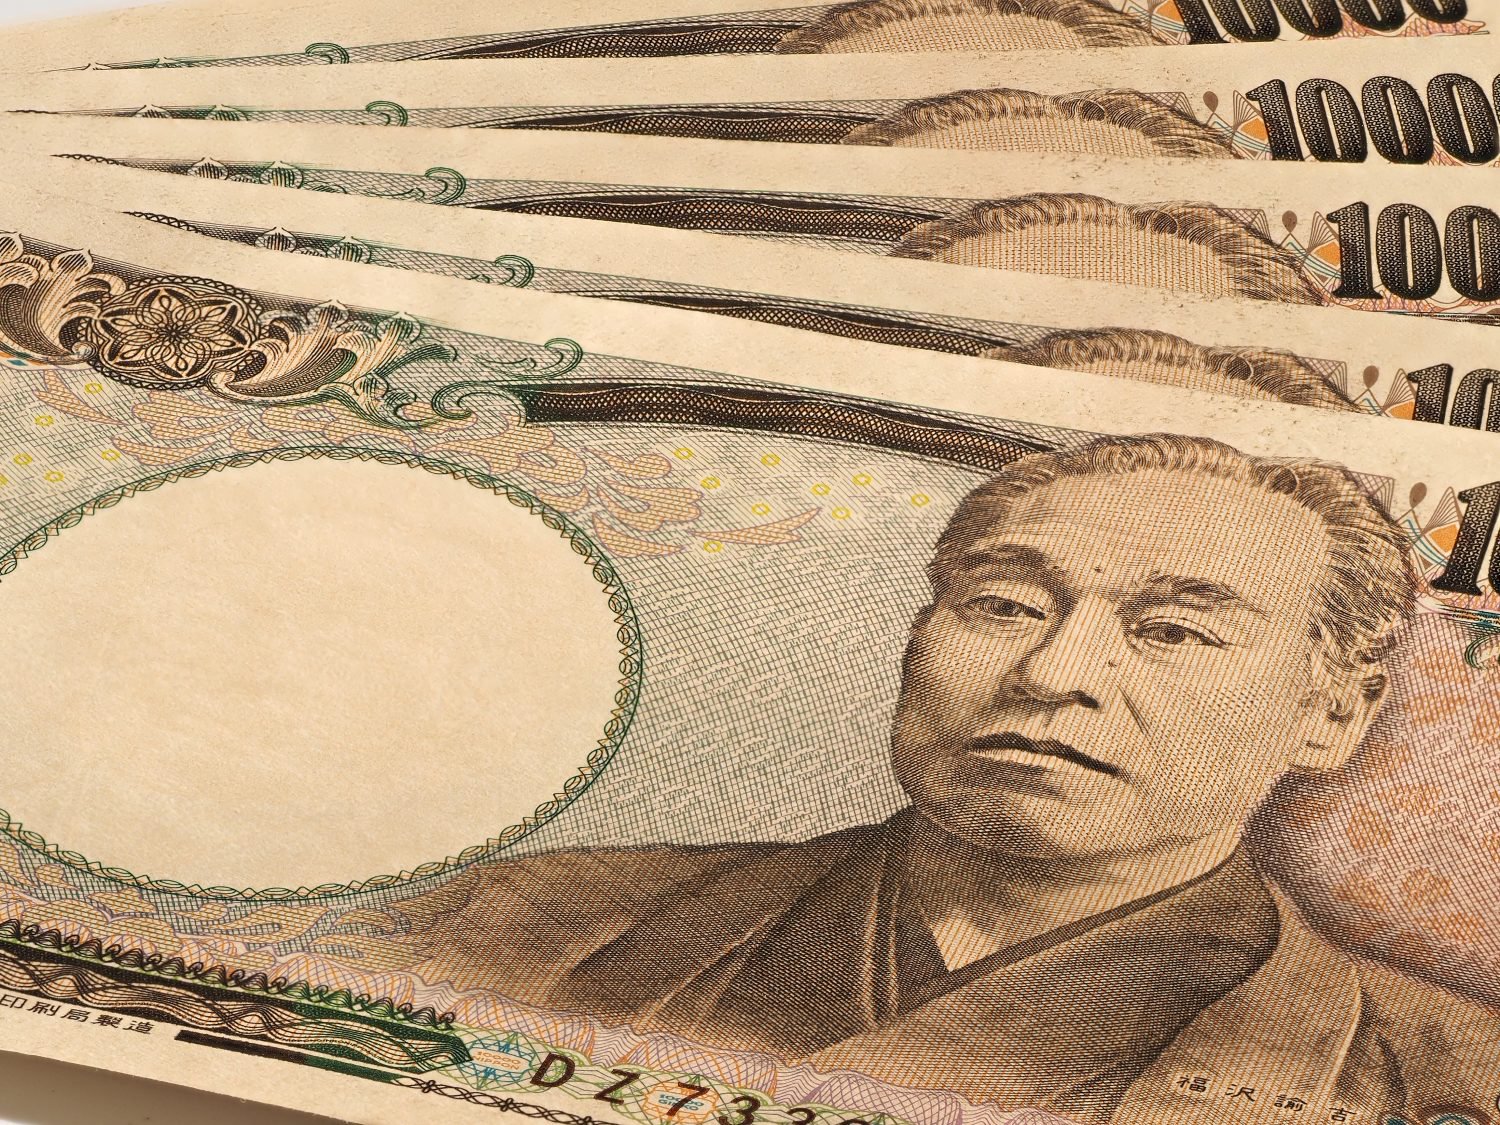 Internet Giant GMO To Roll Out Yen-Pegged Crypto Stablecoin In 2019